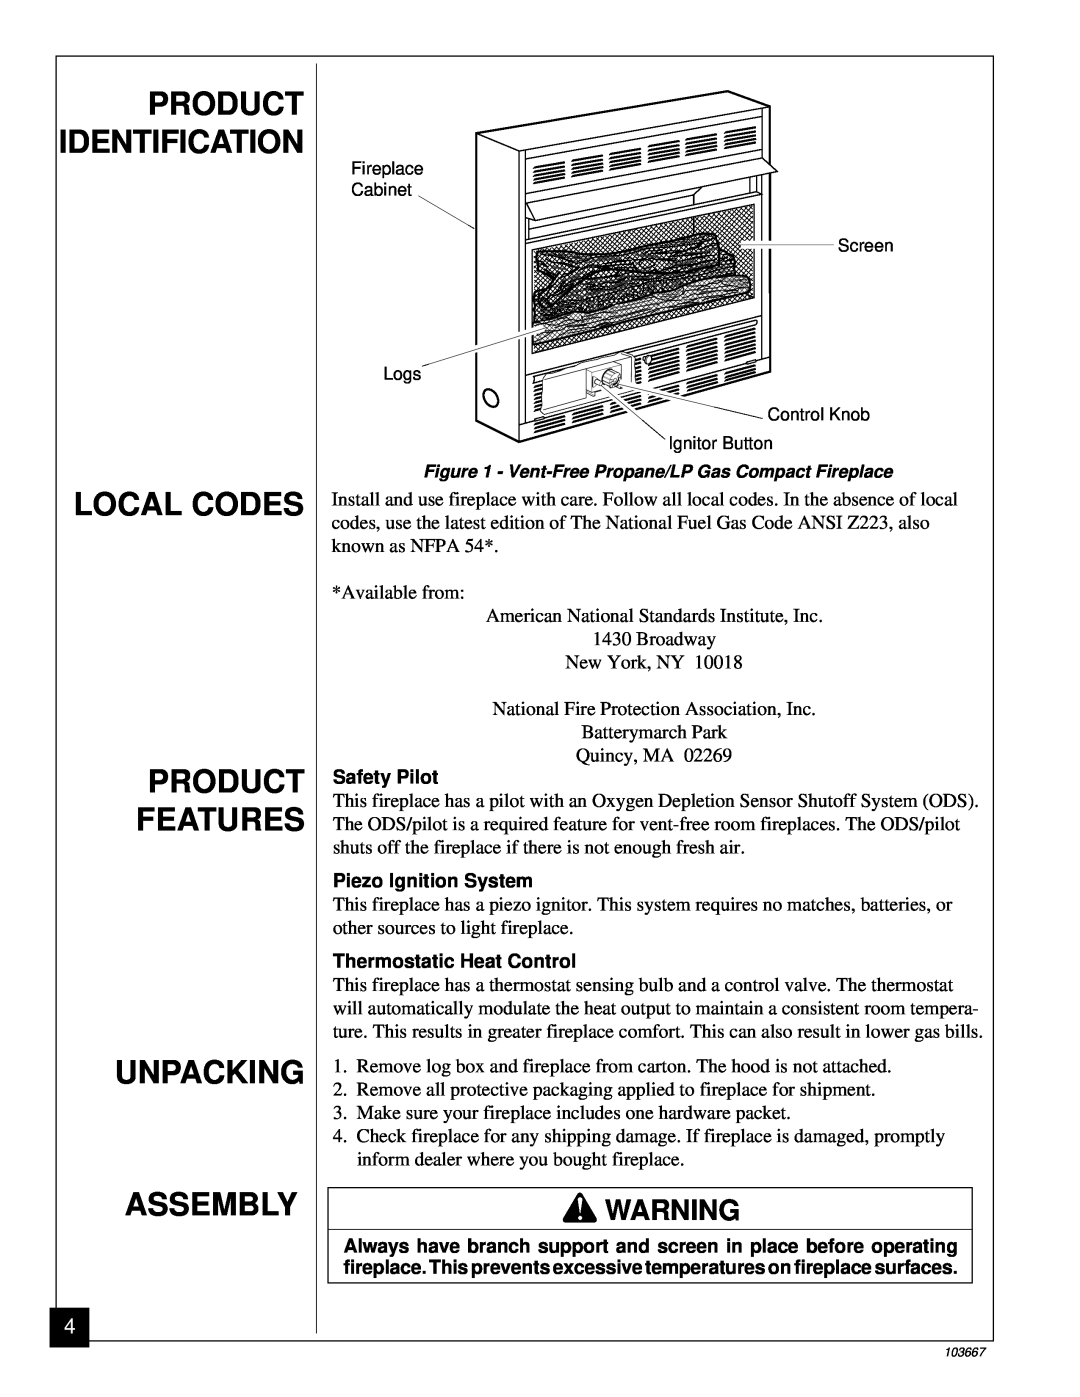 Desa CGCF26TP installation manual Local Codes Product Features Unpacking Assembly, Product Identification 